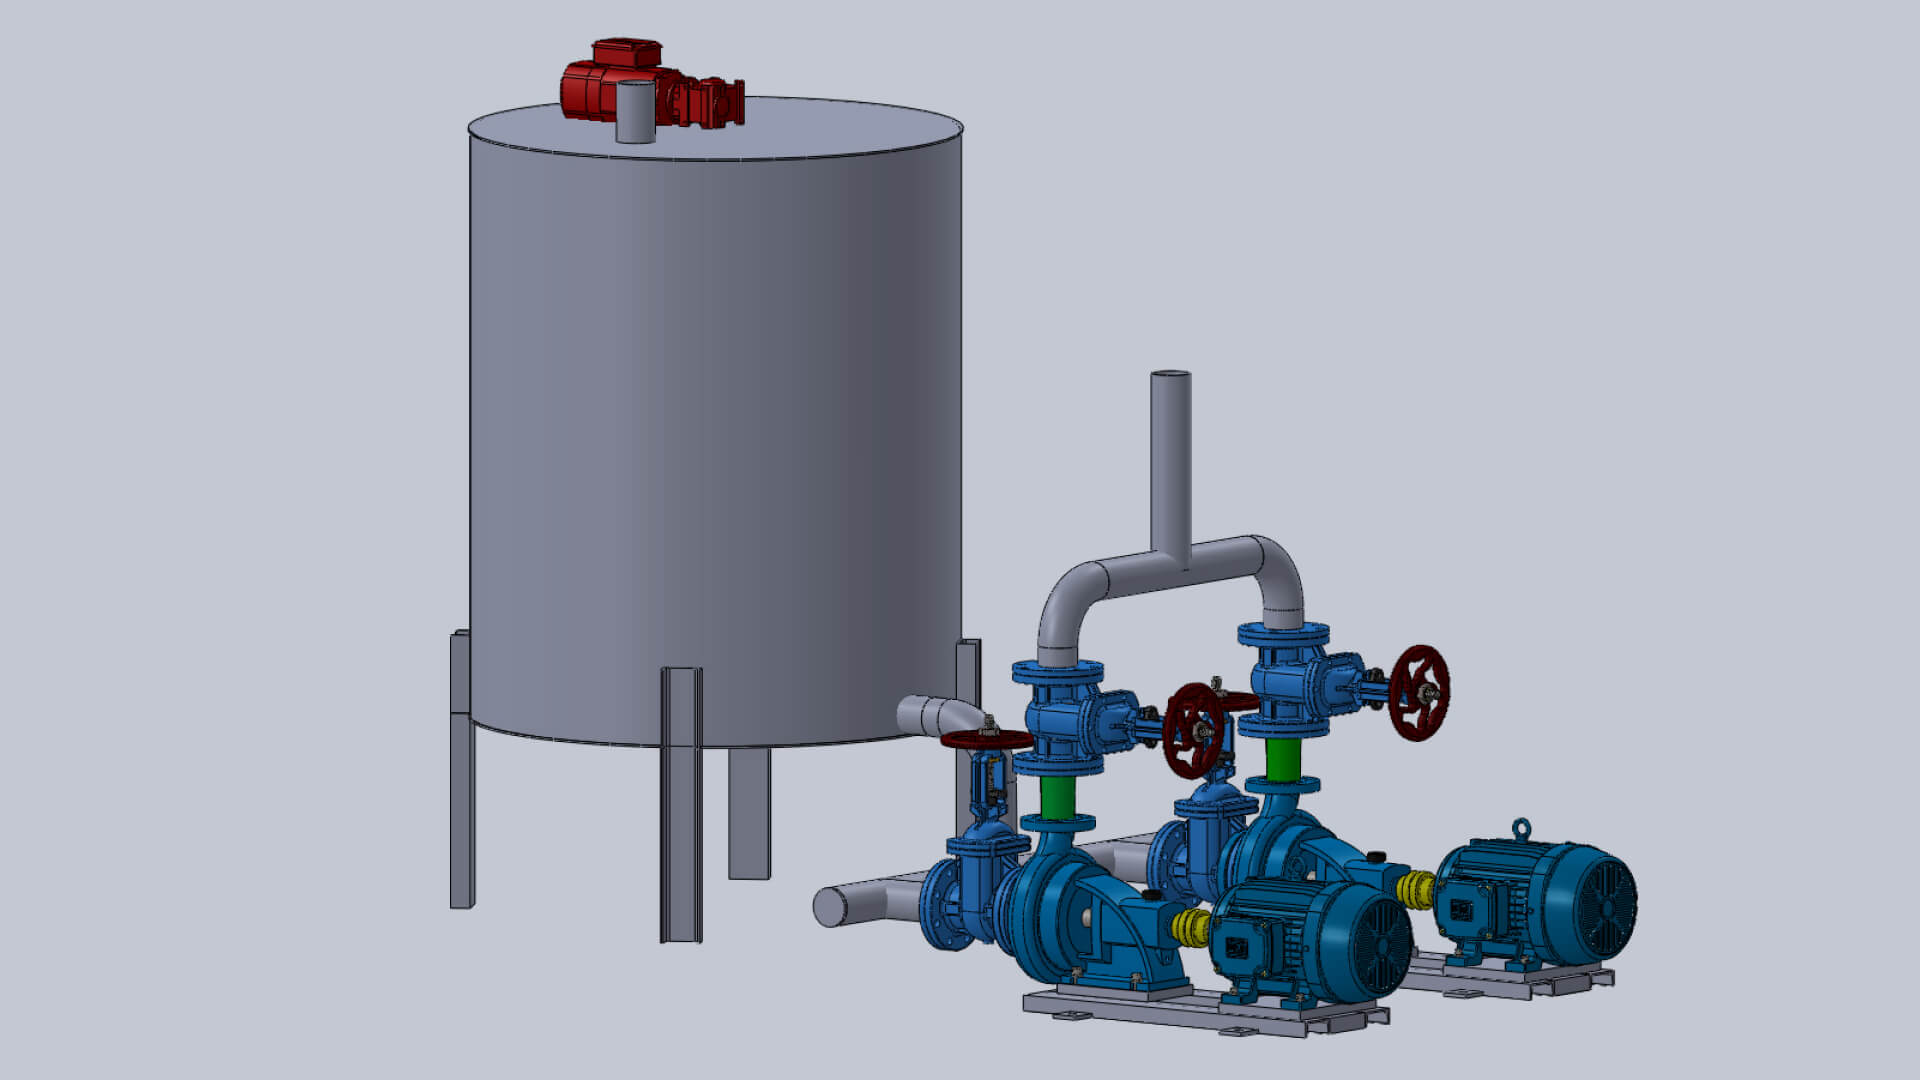 A 3D CAD drawing of a chemical pump and tank